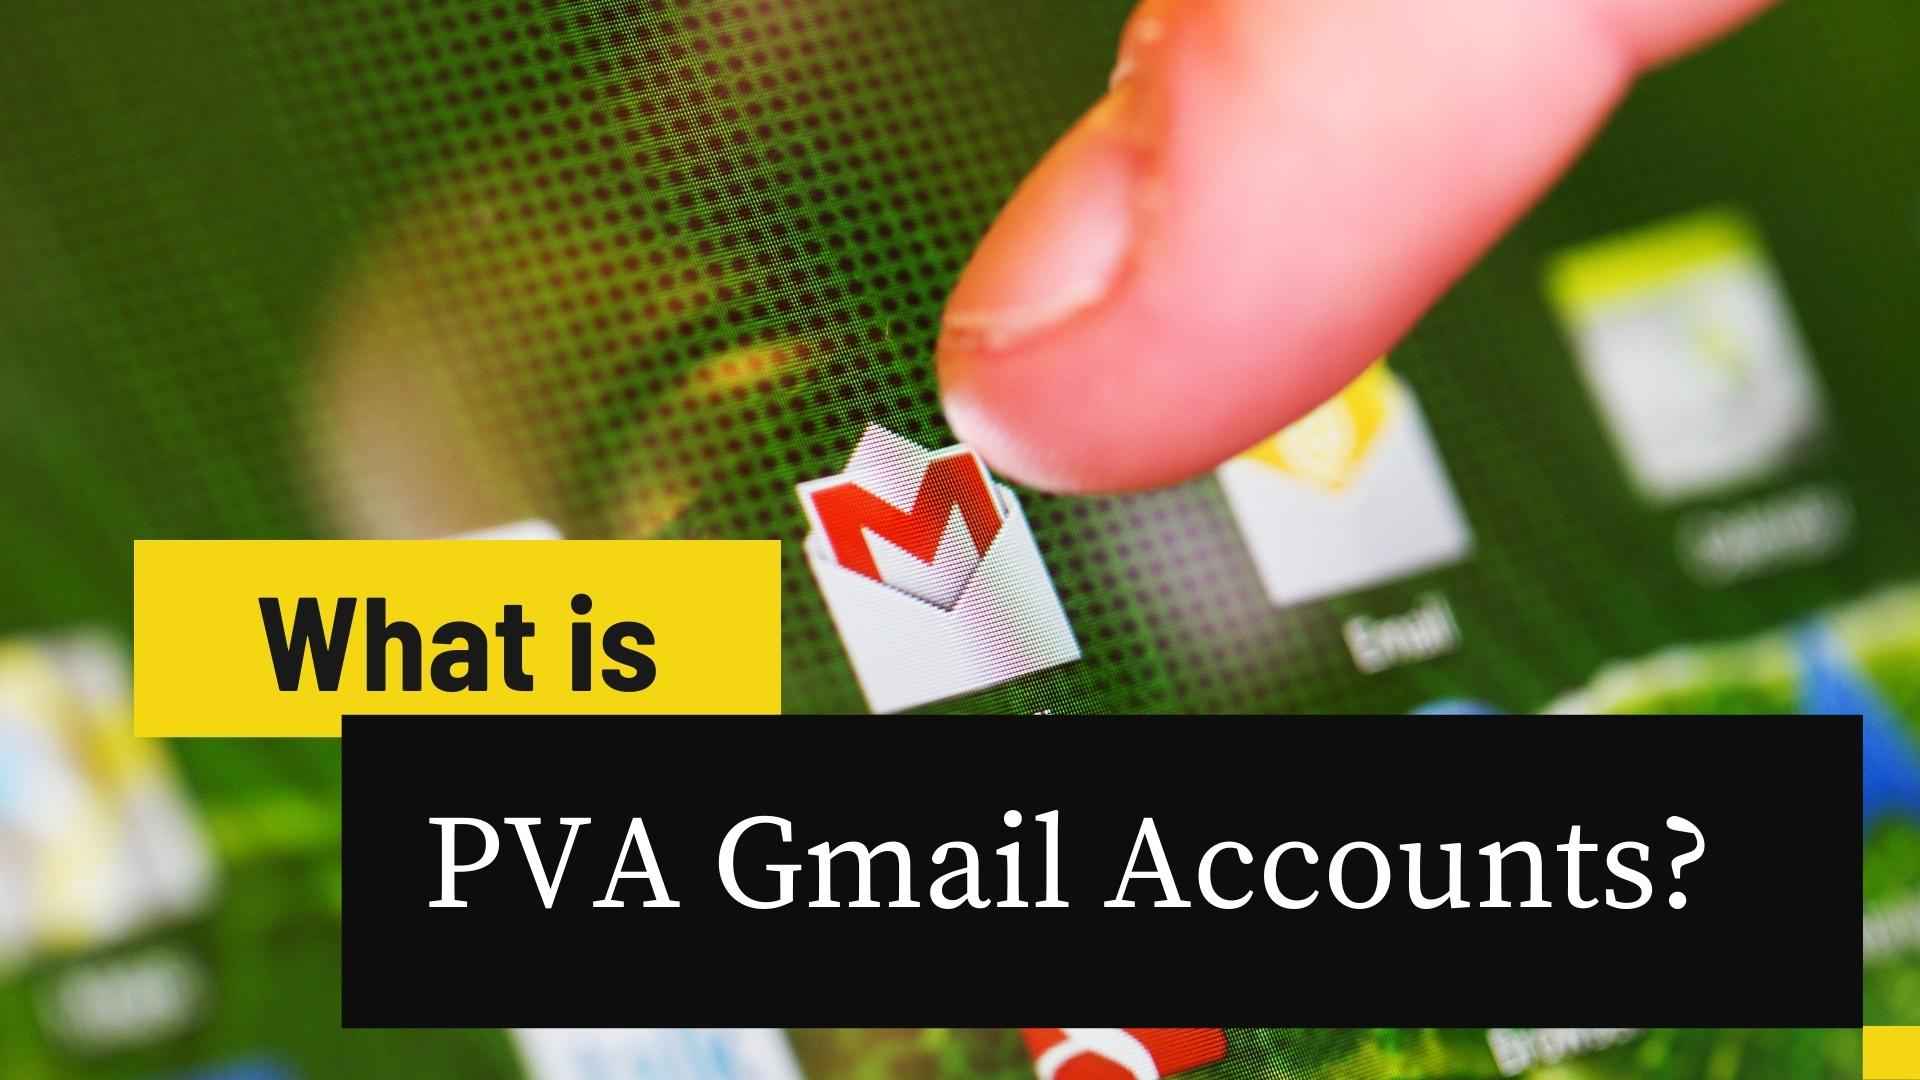 What is PVA Gmail Accounts?